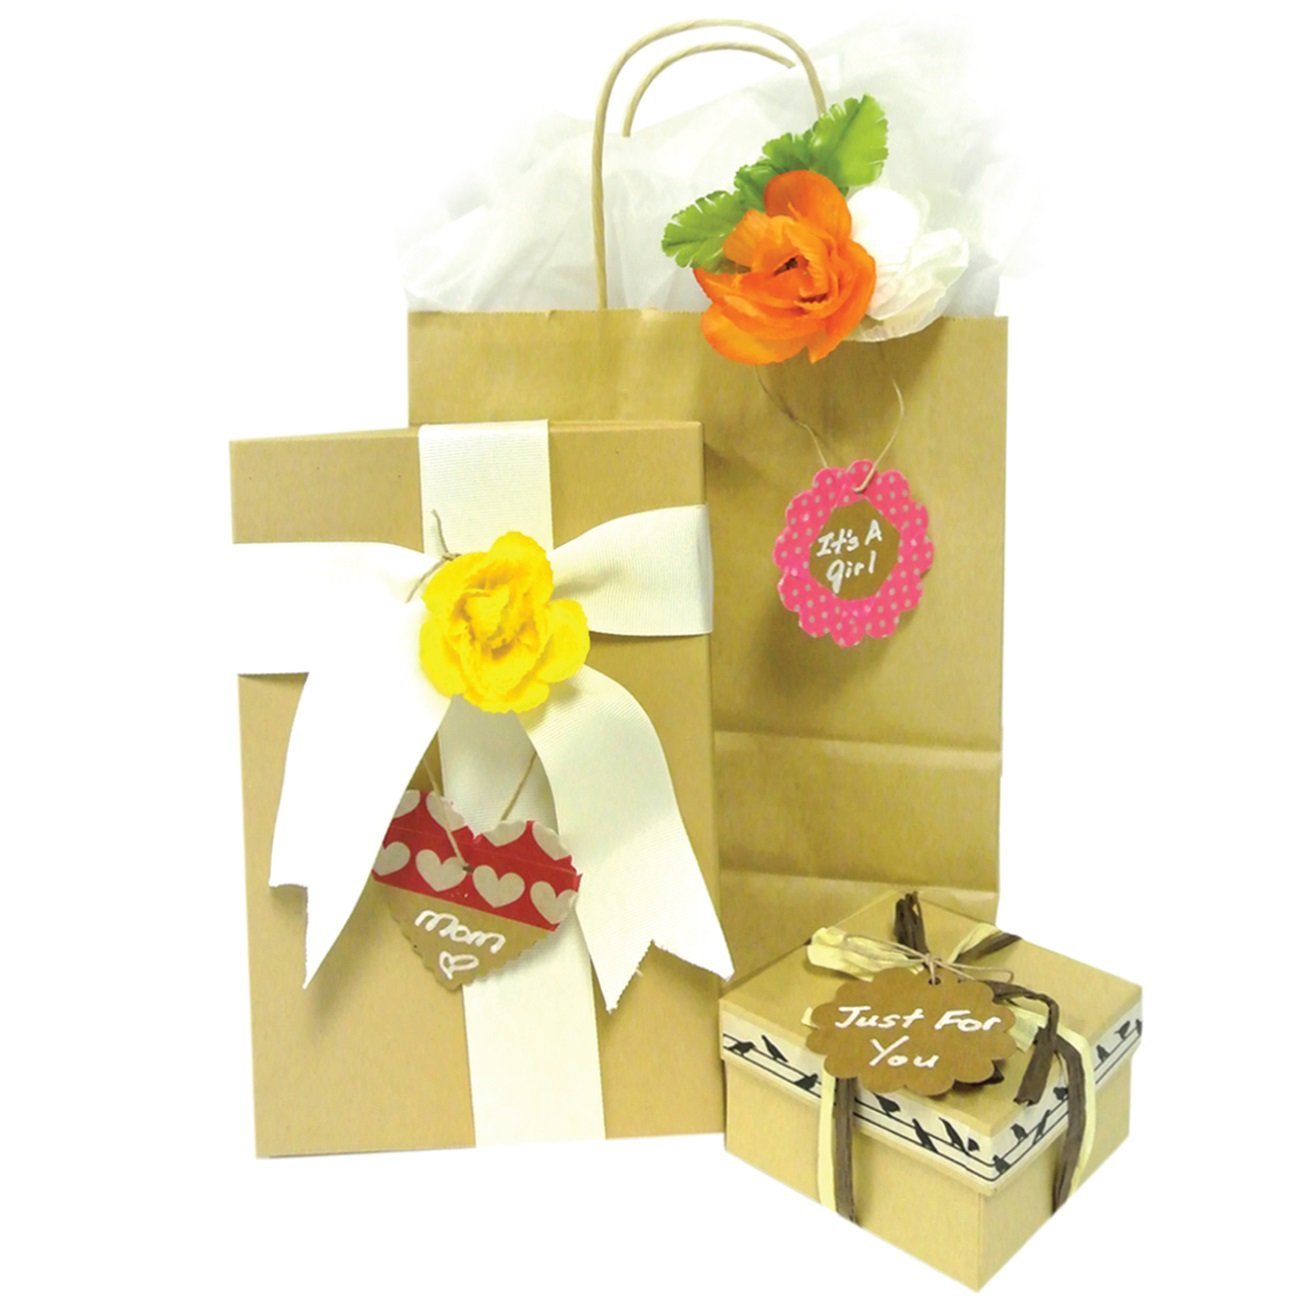 Wrapables 40 Gift Tags/Kraft Hang Tags with Free Cut Strings, Large Scalloped Edge (Set of 4)